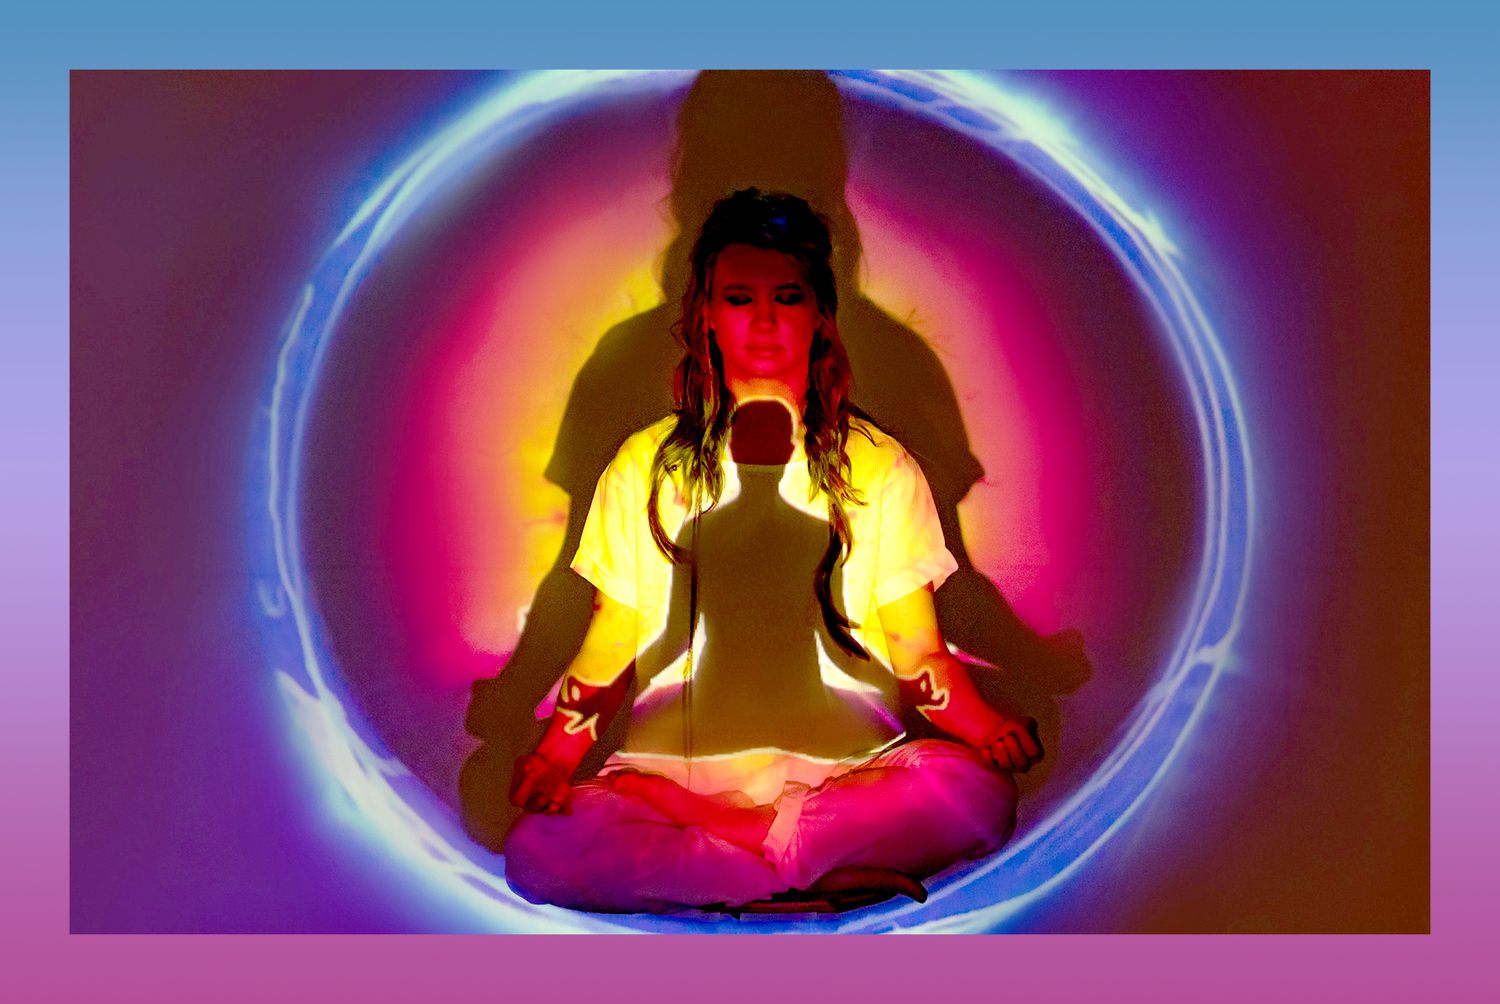 woman sitting lotus pose meditating inside circle of light with aura colored lights